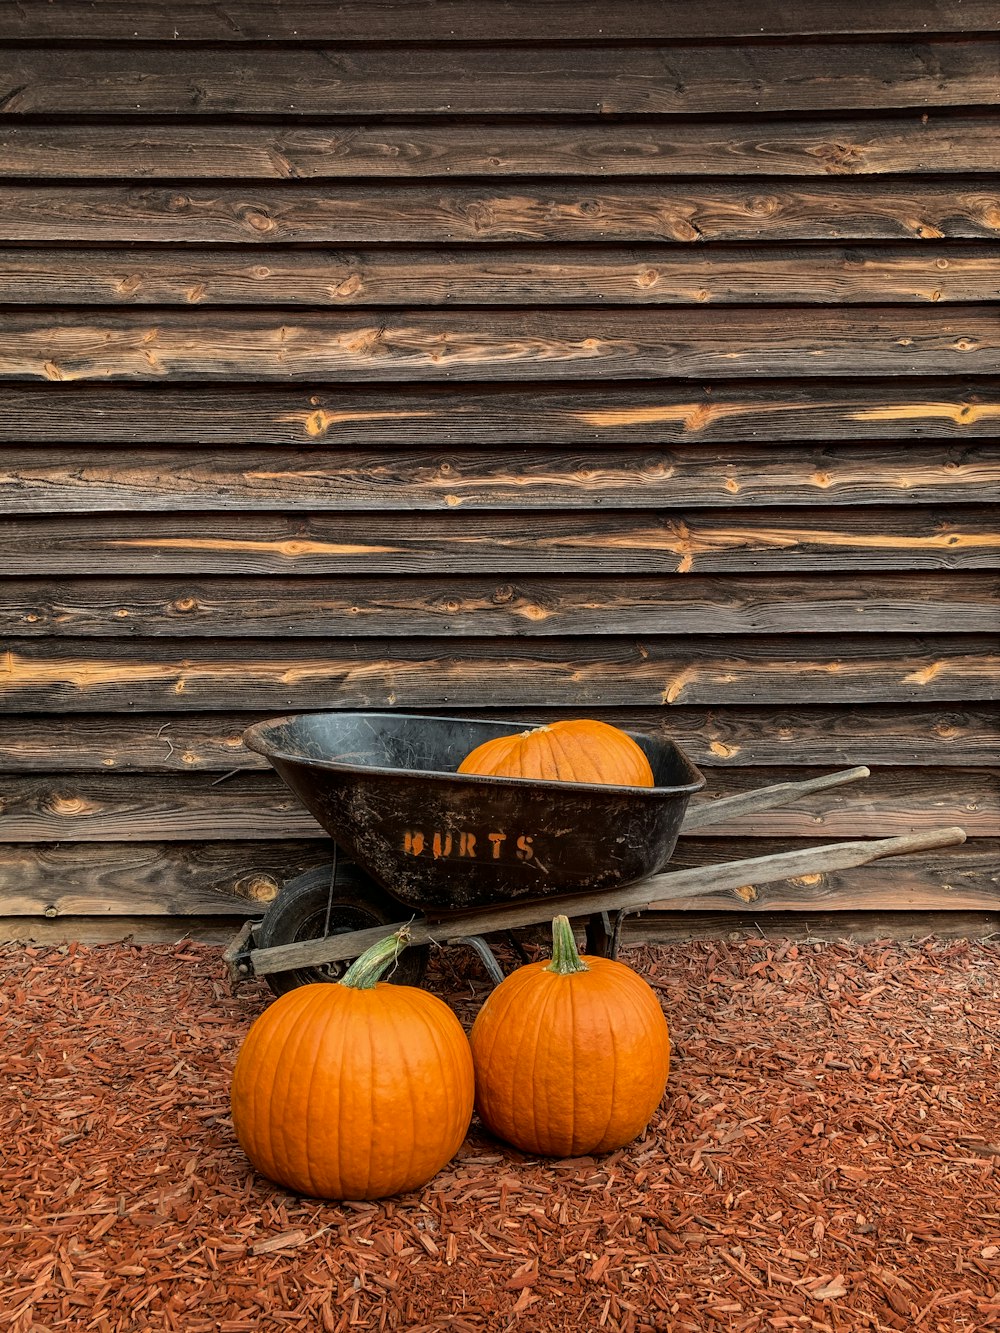 a wheelbarrow filled with three pumpkins sitting on the ground